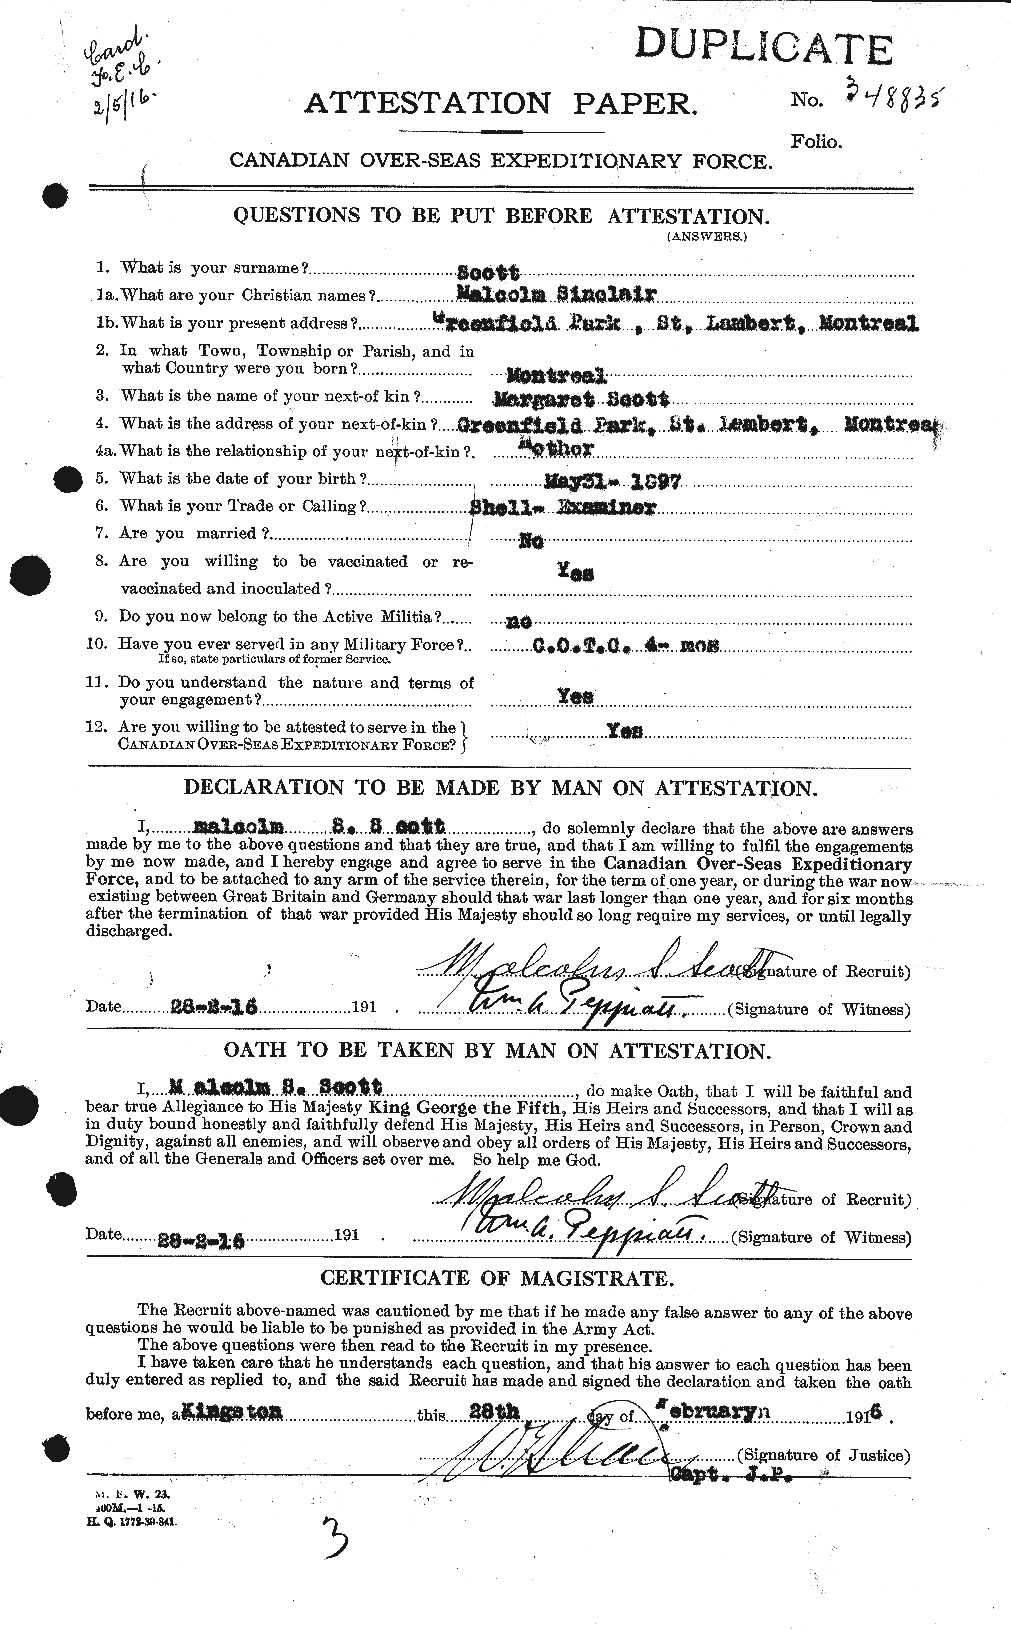 Personnel Records of the First World War - CEF 083513a